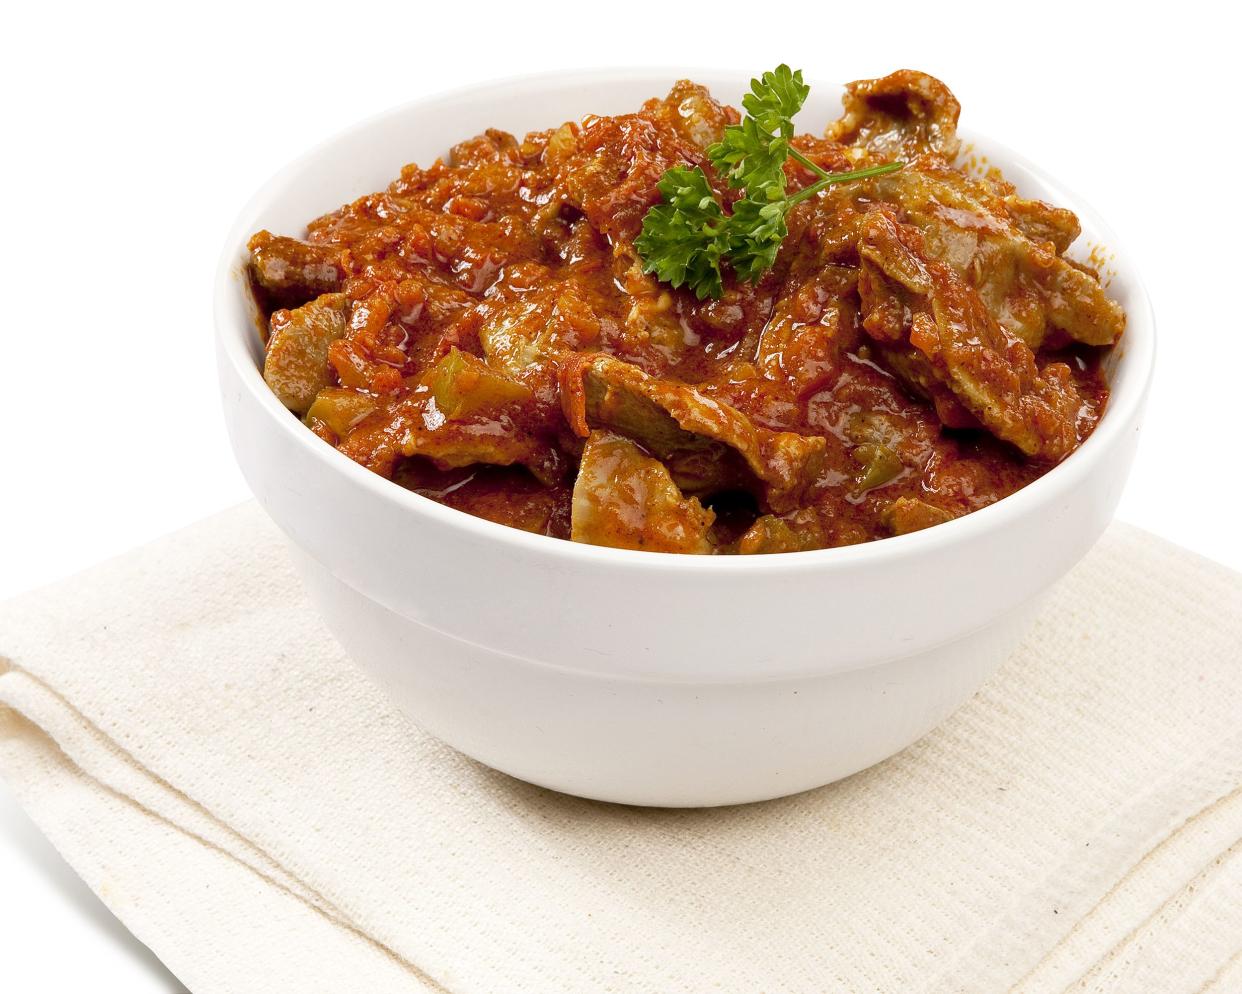 African-style braised chicken in peanut sauce (crock pot) in a white bowl on a napkin with a white background